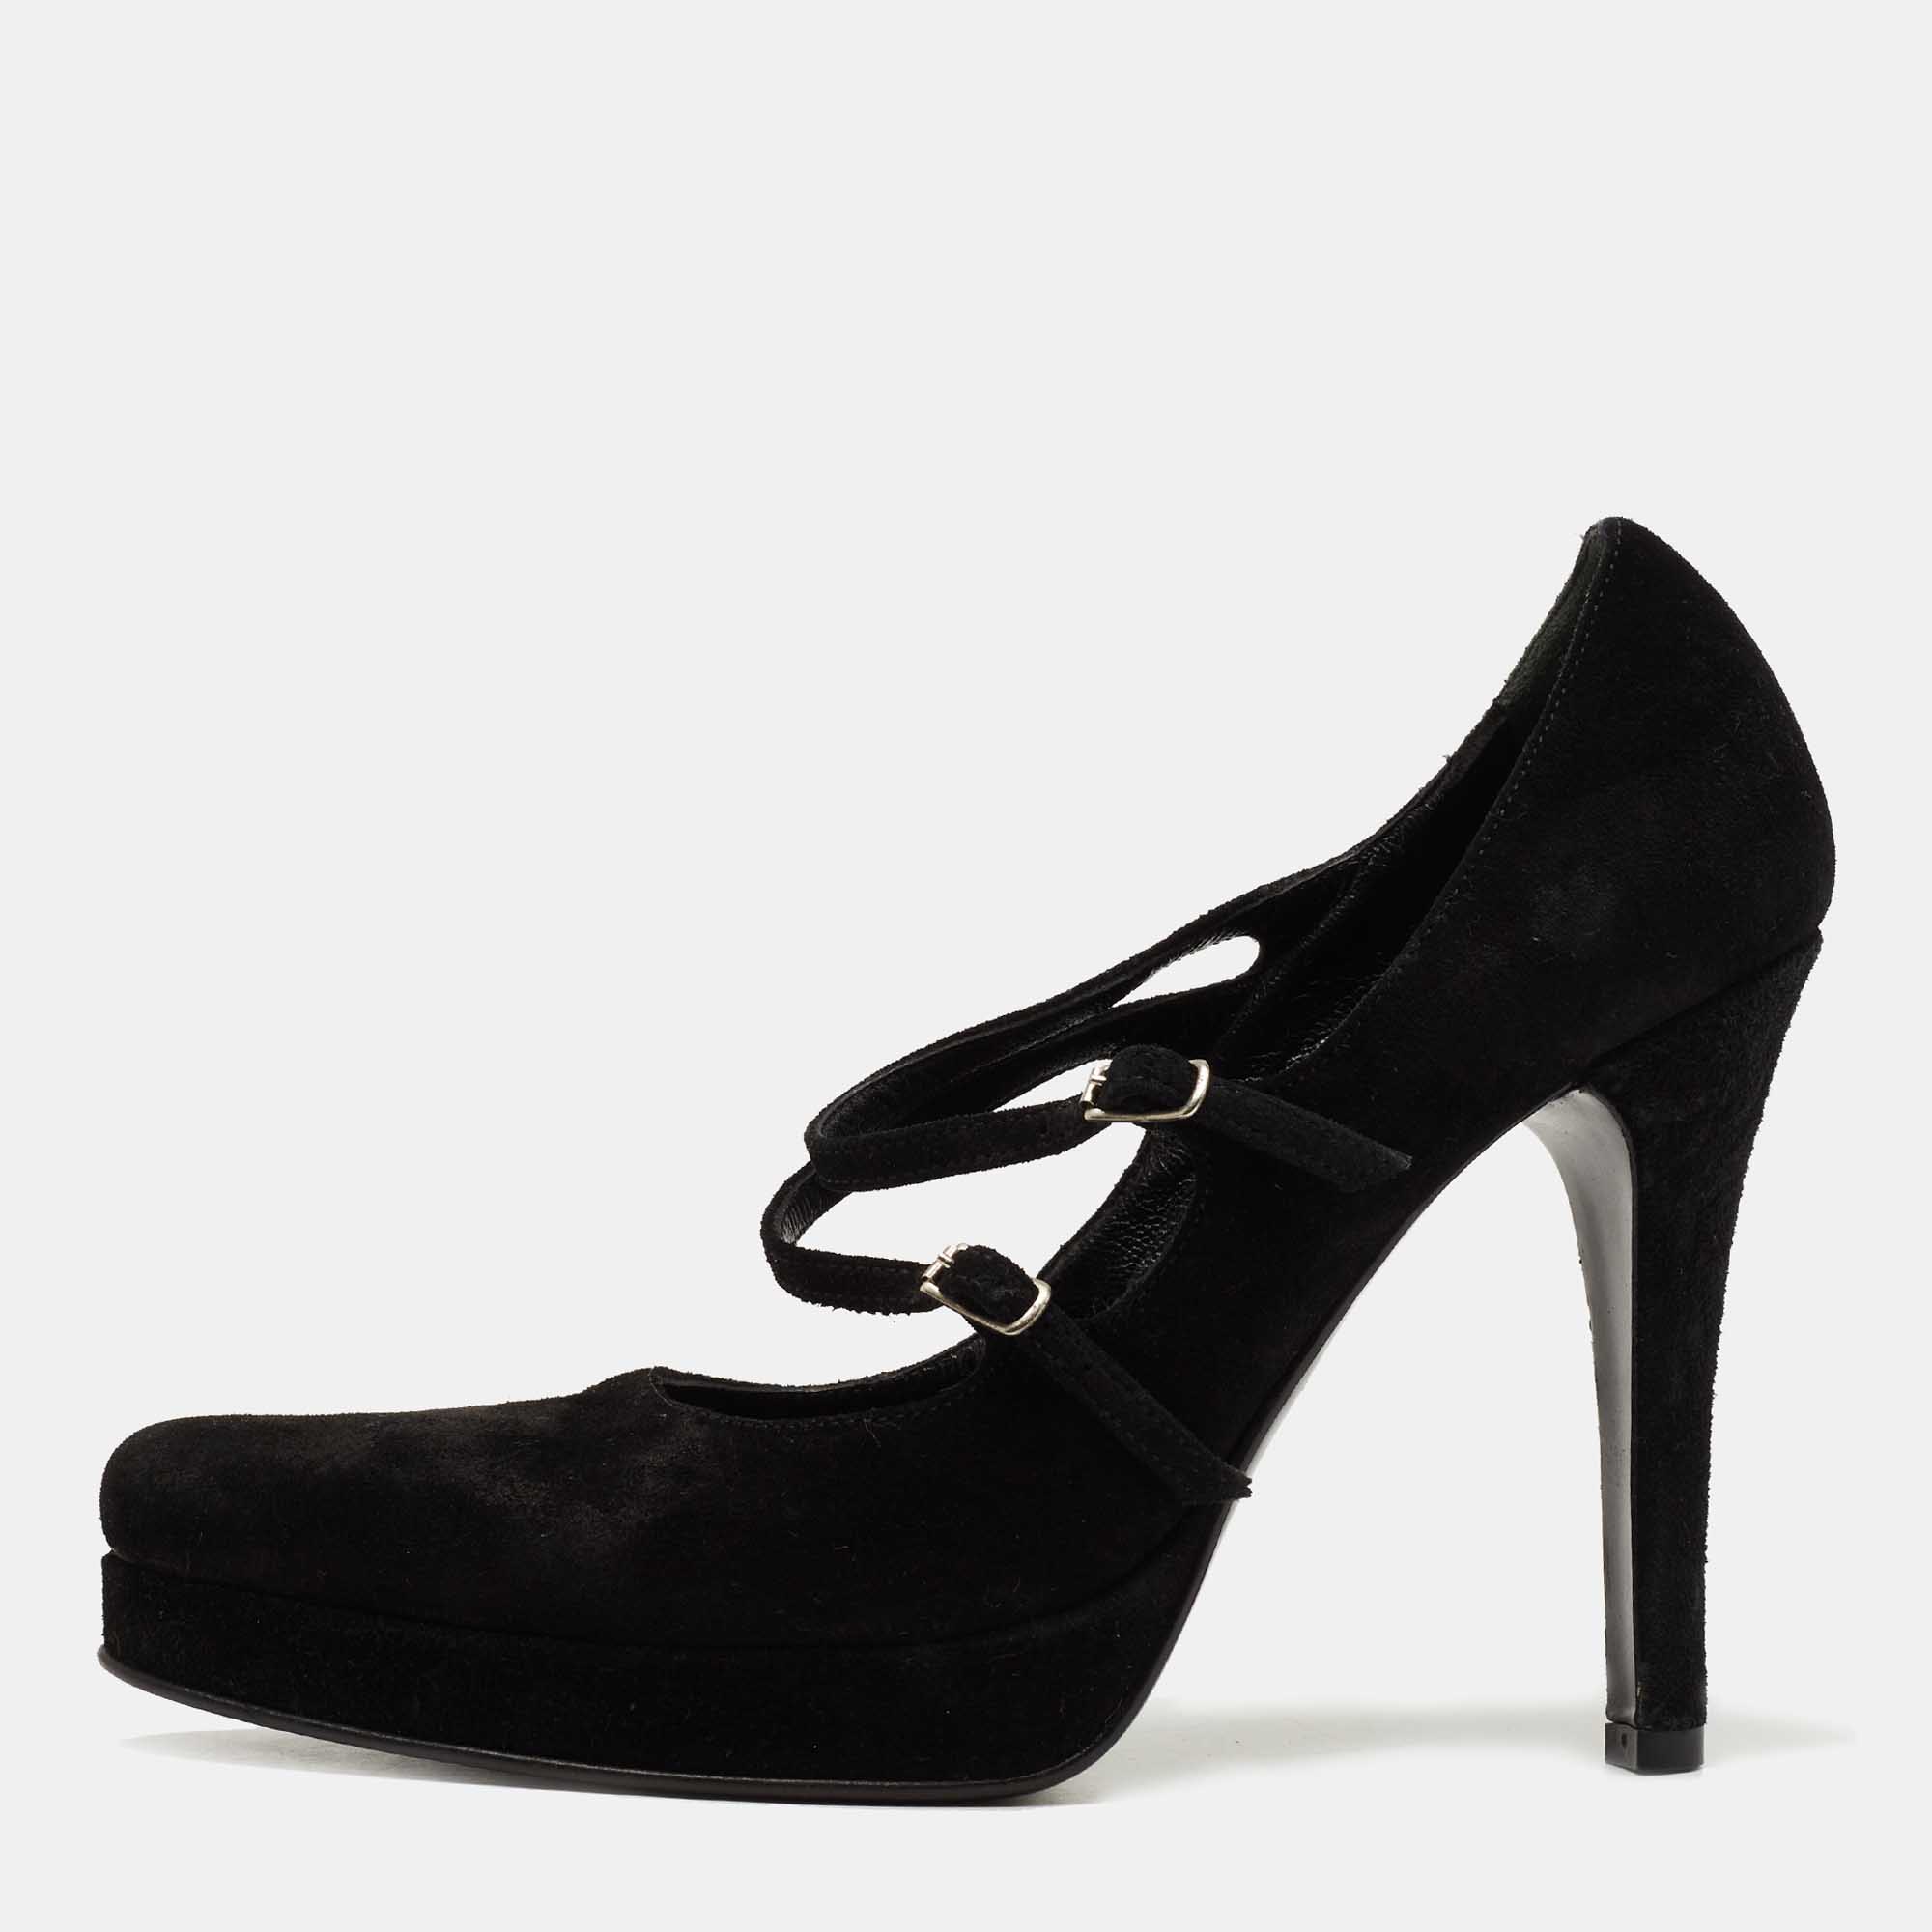 Exhibit an elegant style with this pair of pumps. These elegant shoes are crafted from quality materials. They are set on durable soles and sleek heels.